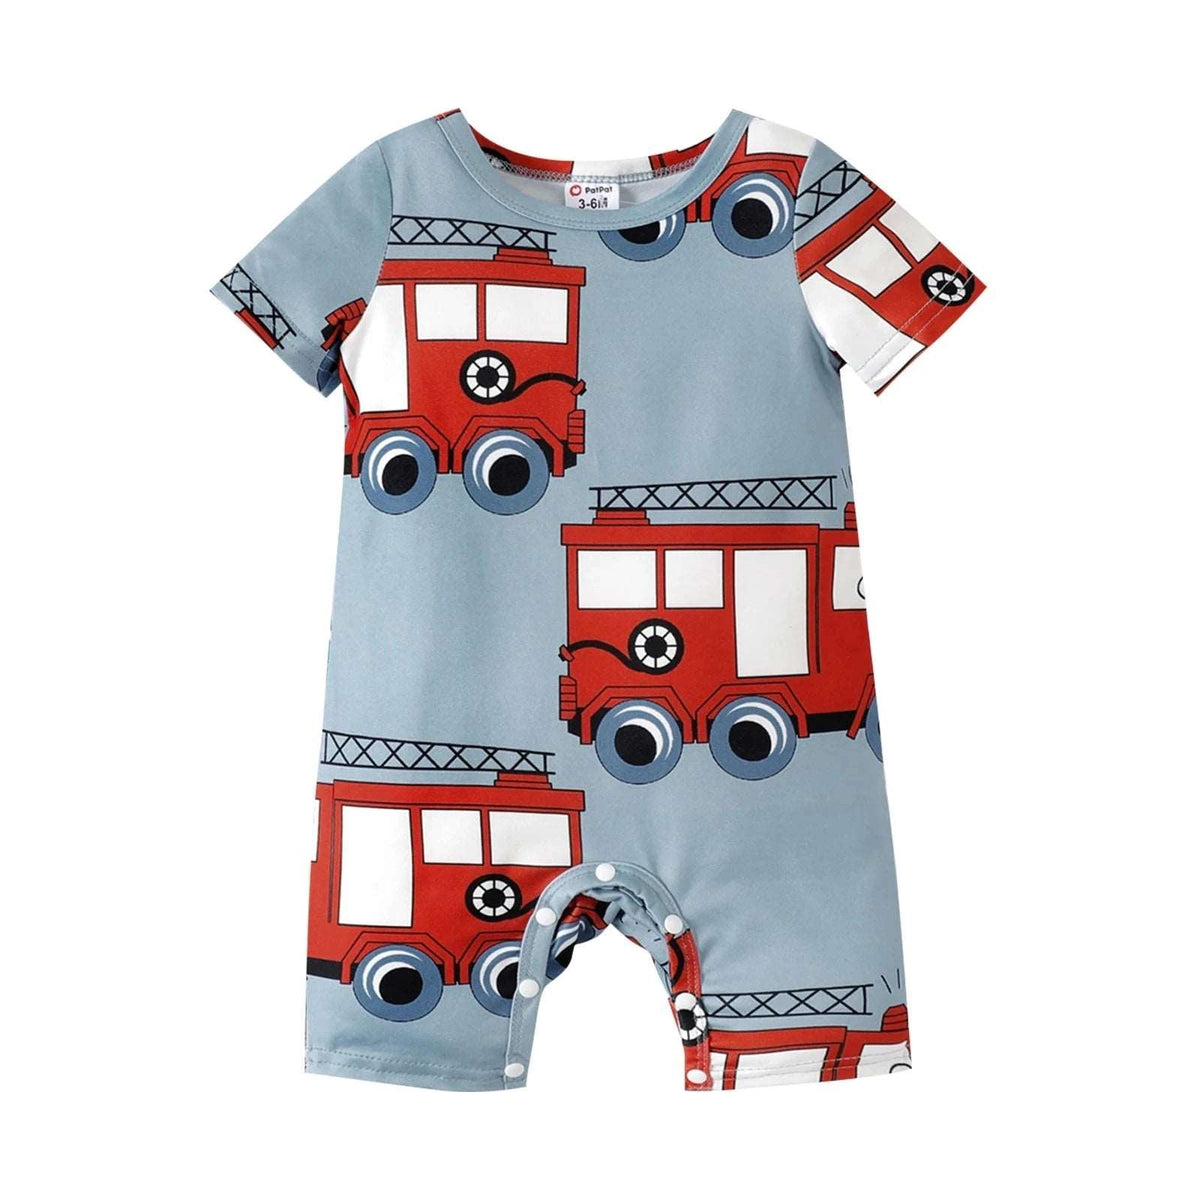 Baby Jumpsuit with Fire Engine Print - For all baby